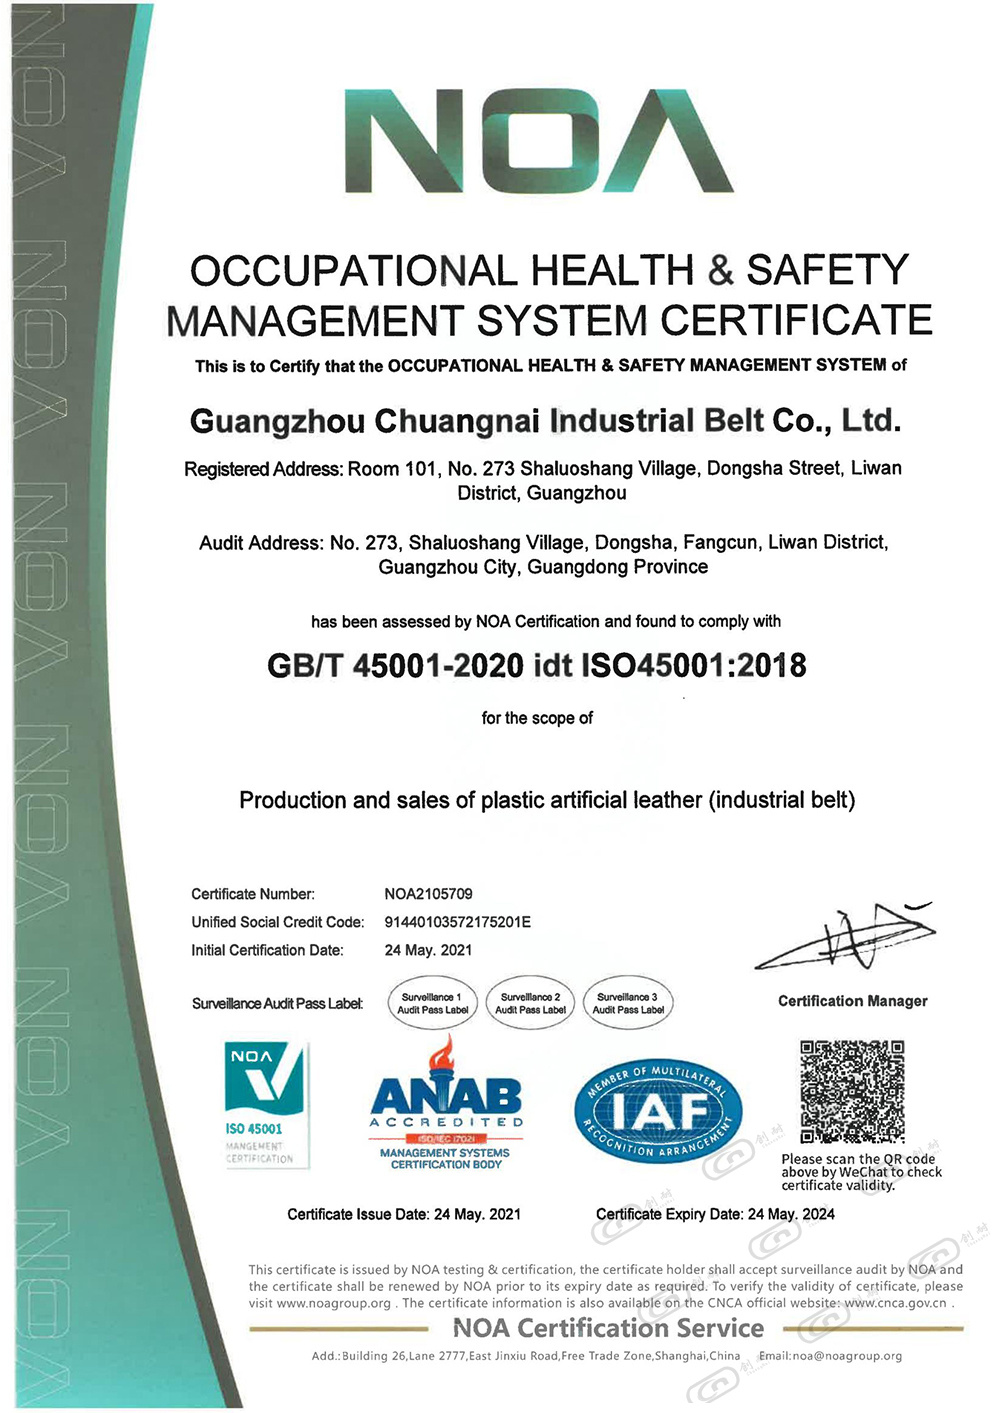 Occupational Health and safety management system certification